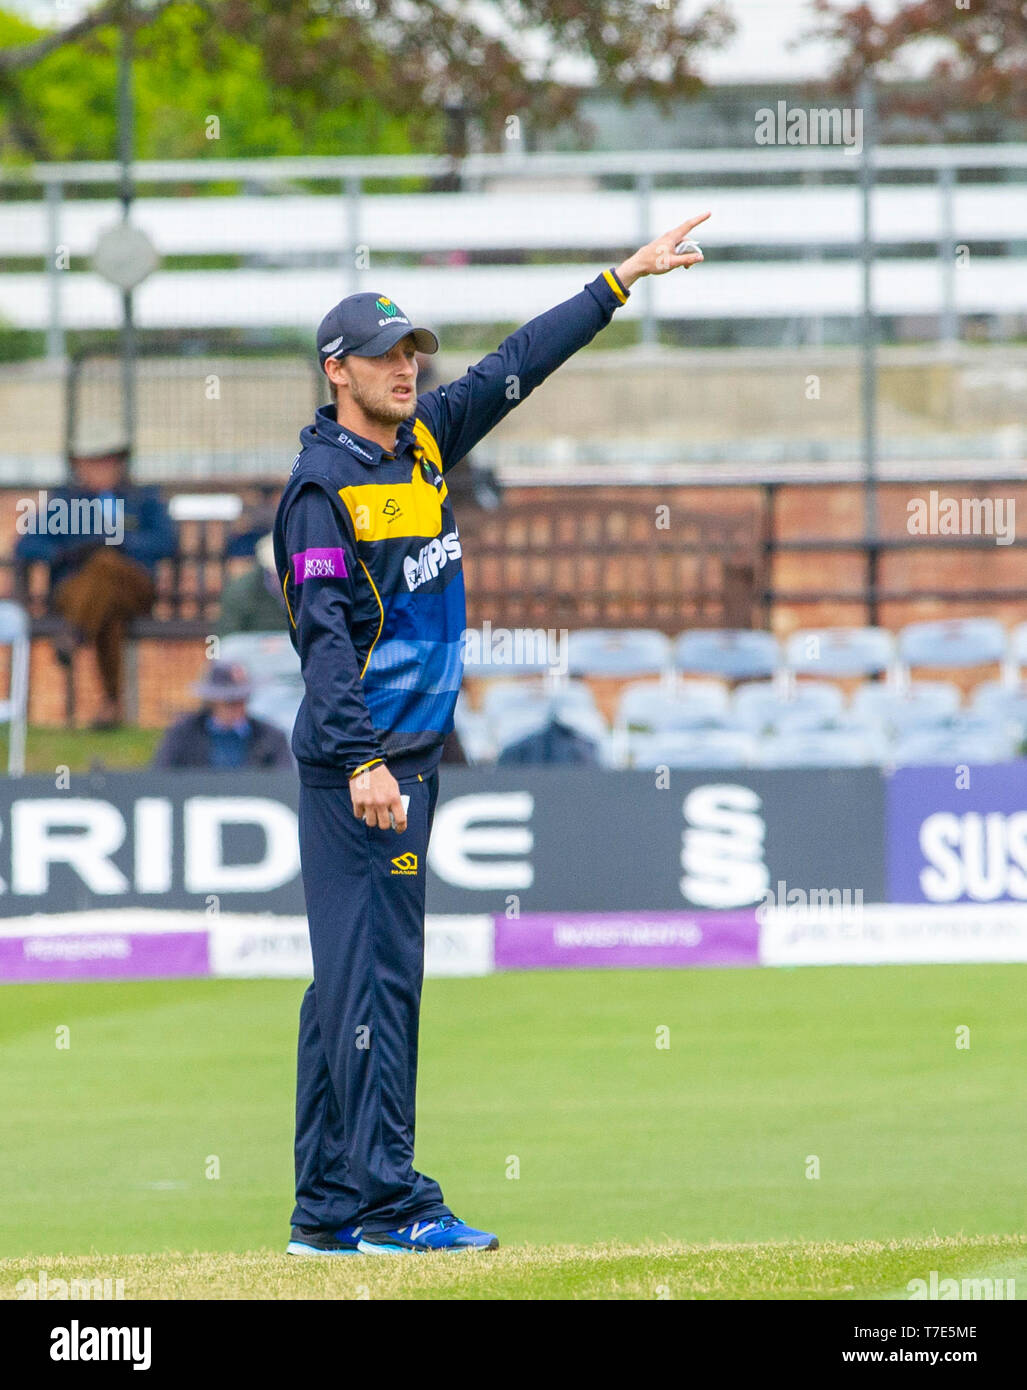 Brighton, UK. 7th May 2019 - Billy Root of Glamorgan fielding during the Royal London One-Day Cup match between Sussex Sharks and Glamorgan at the 1st Central County ground in Hove. Credit : Simon Dack / Alamy Live News Stock Photo